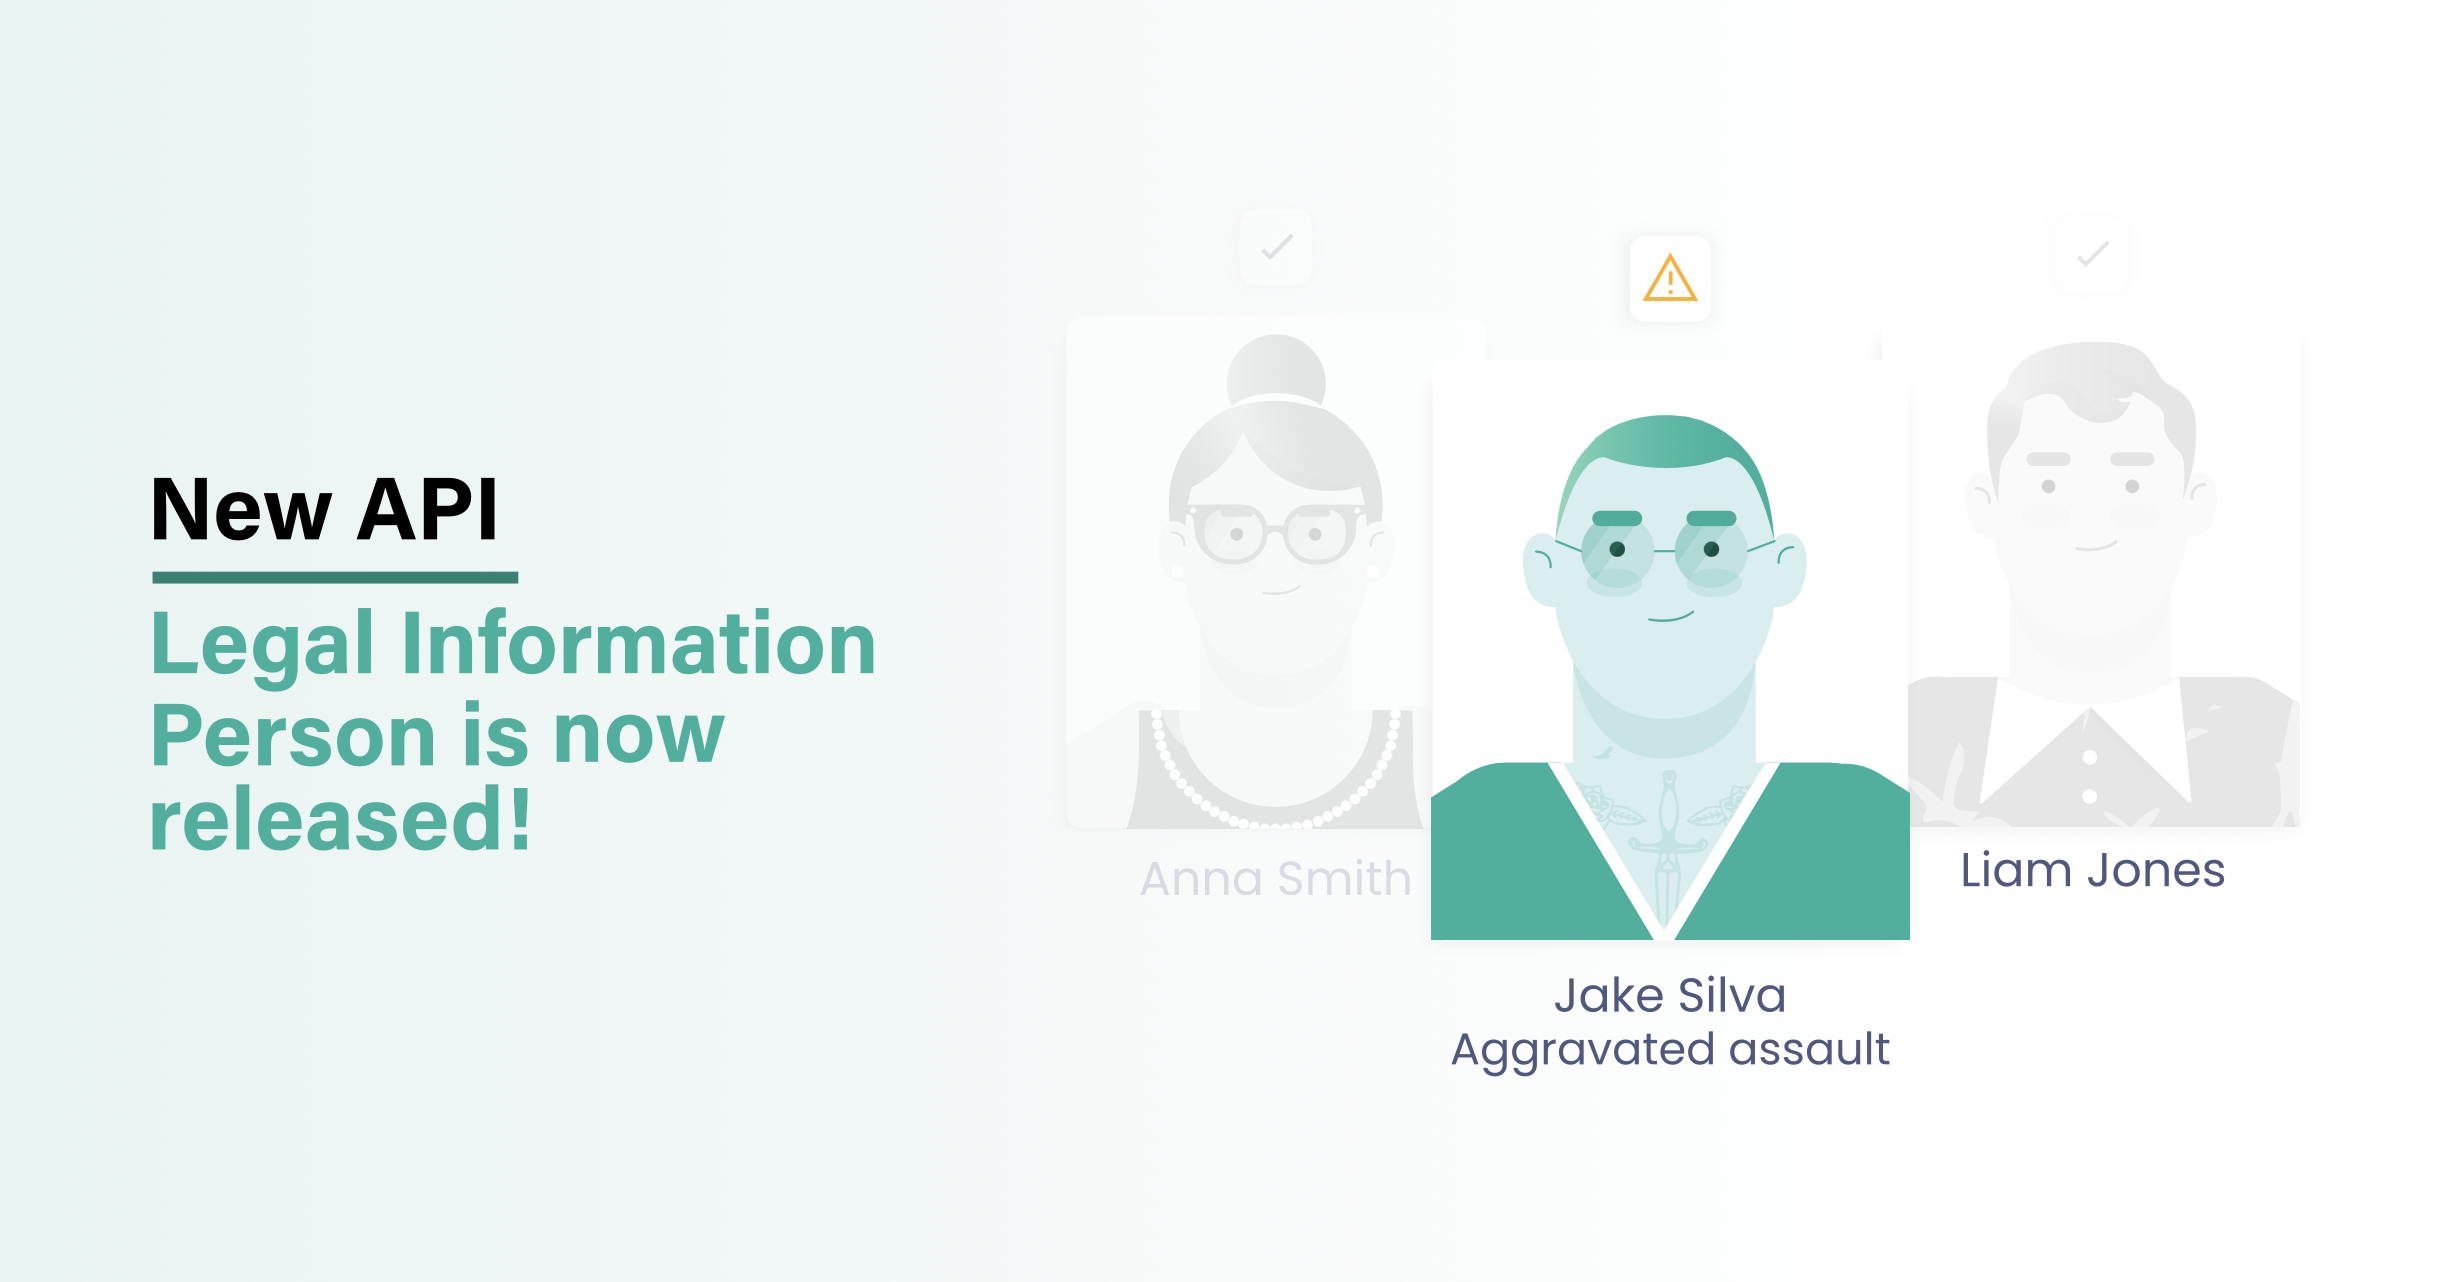 Say hello to our new API - Legal Information Person